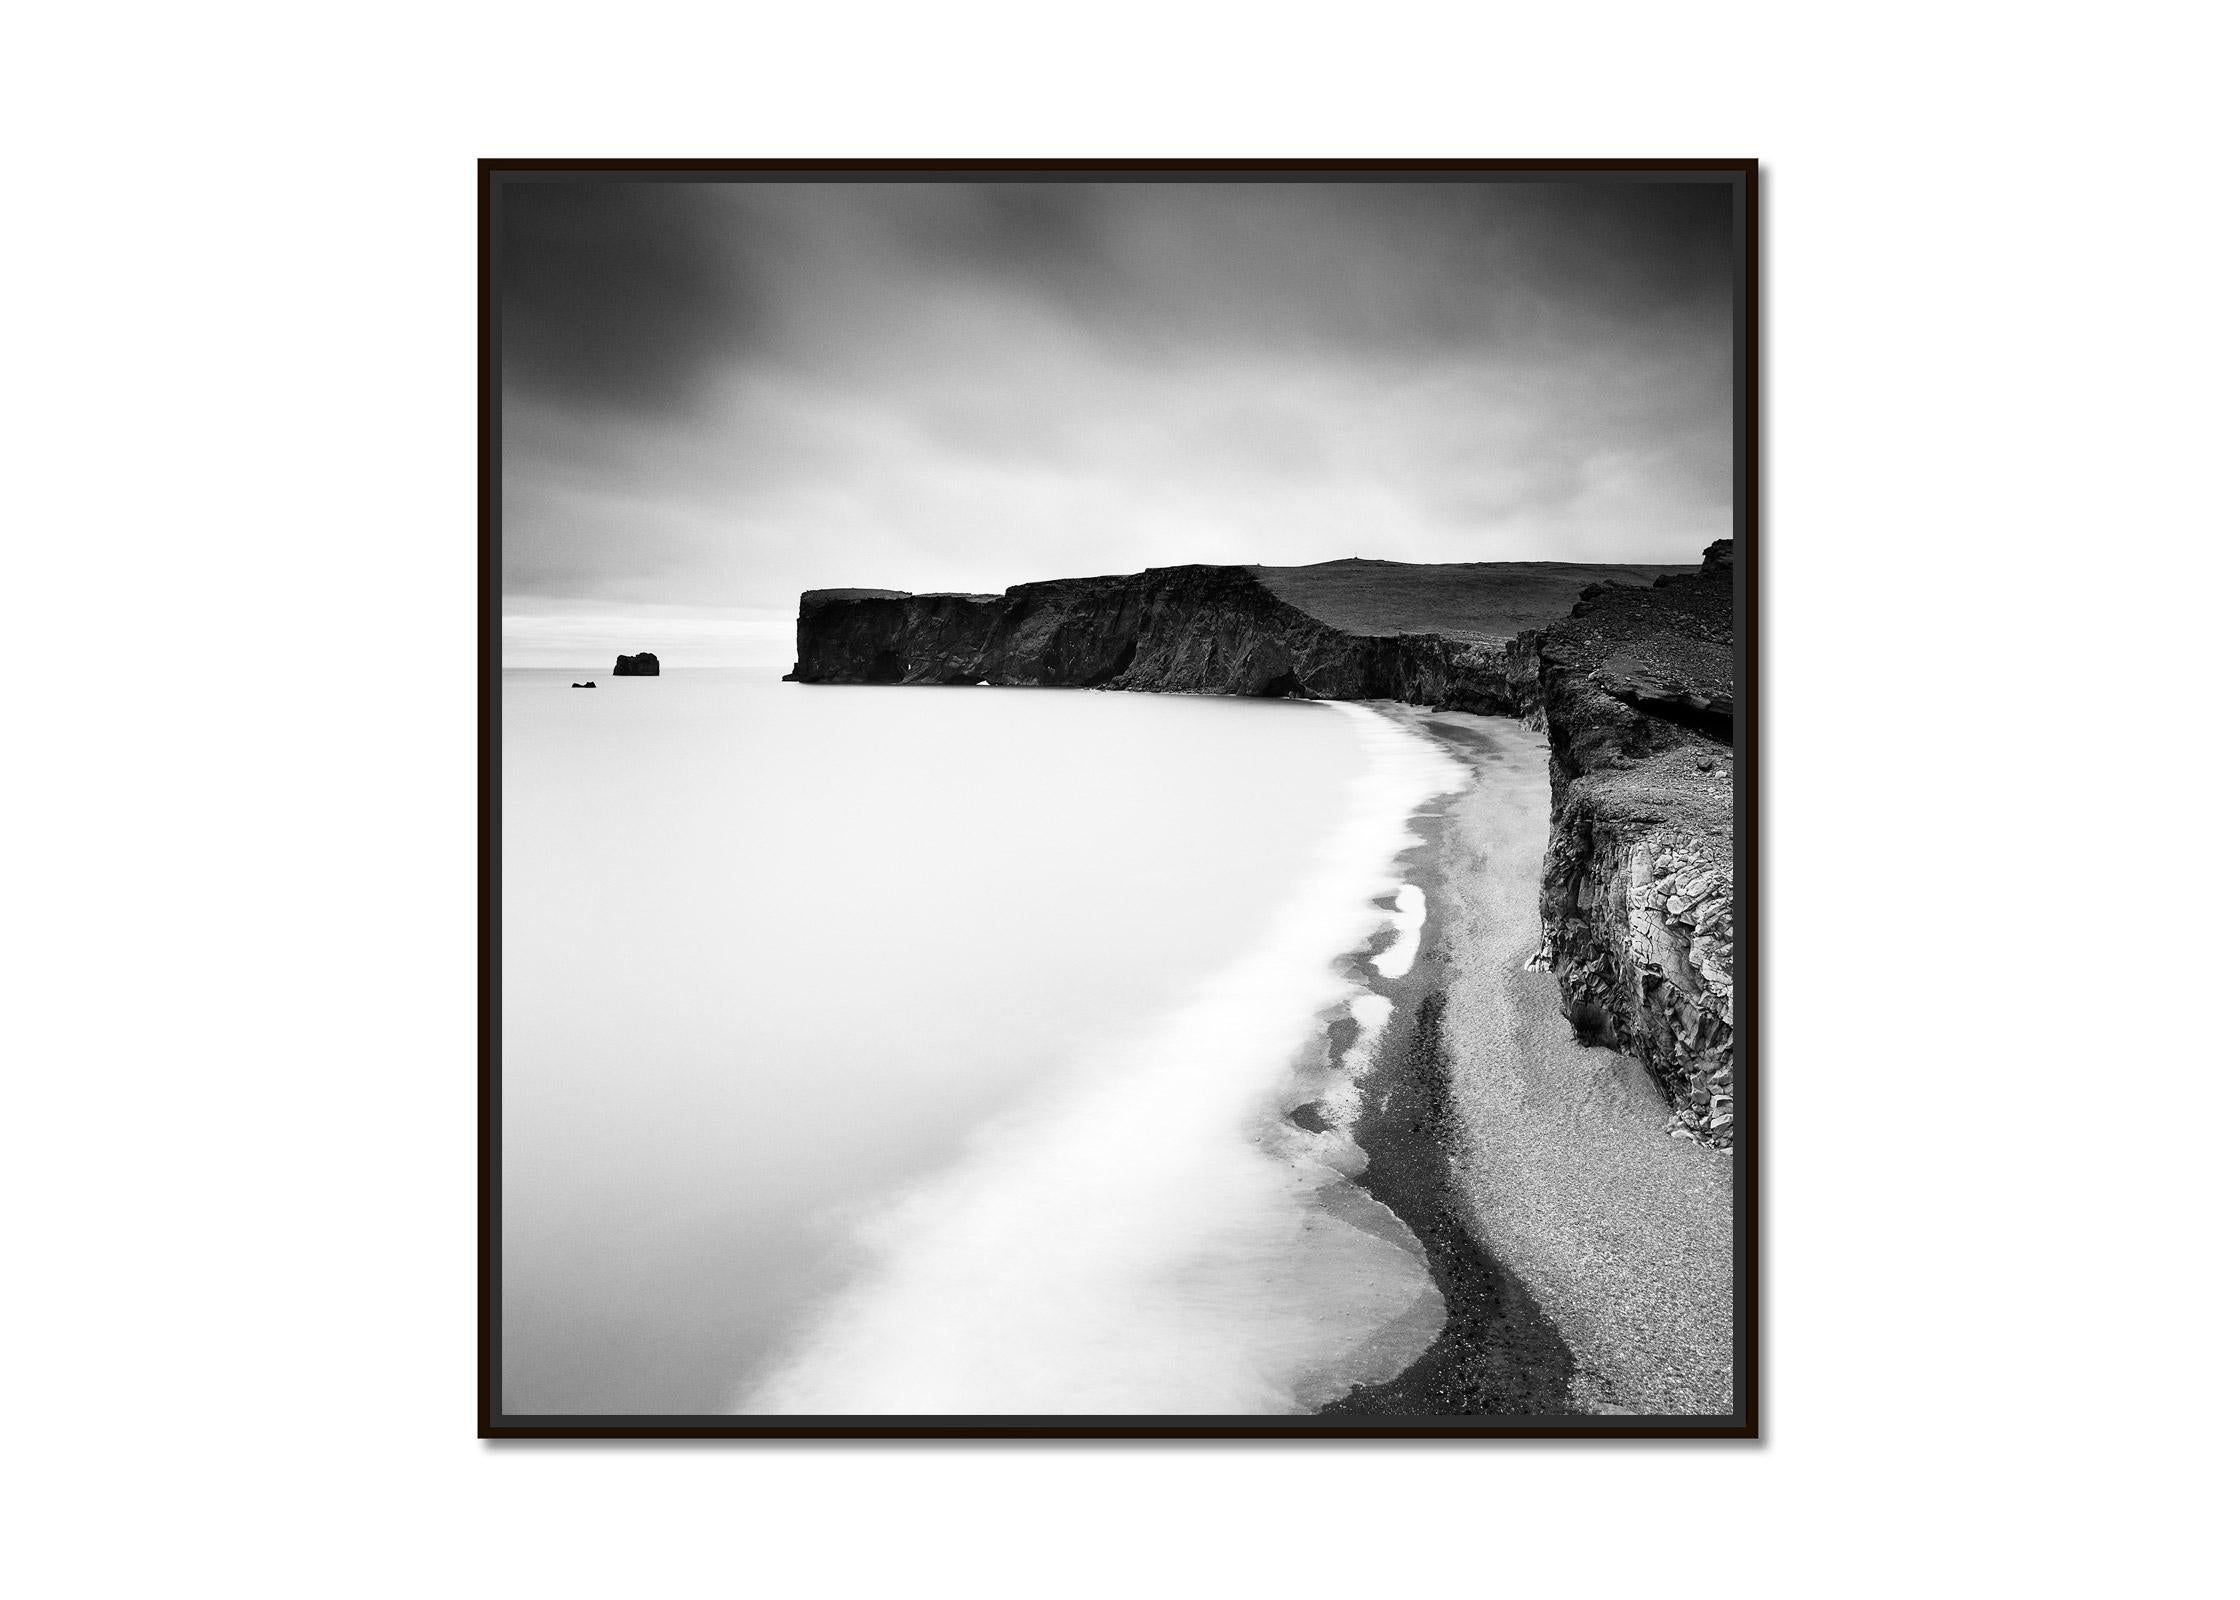 Detached Island, coast, Iceland, black and white photography, fine art landscape - Photograph by Gerald Berghammer